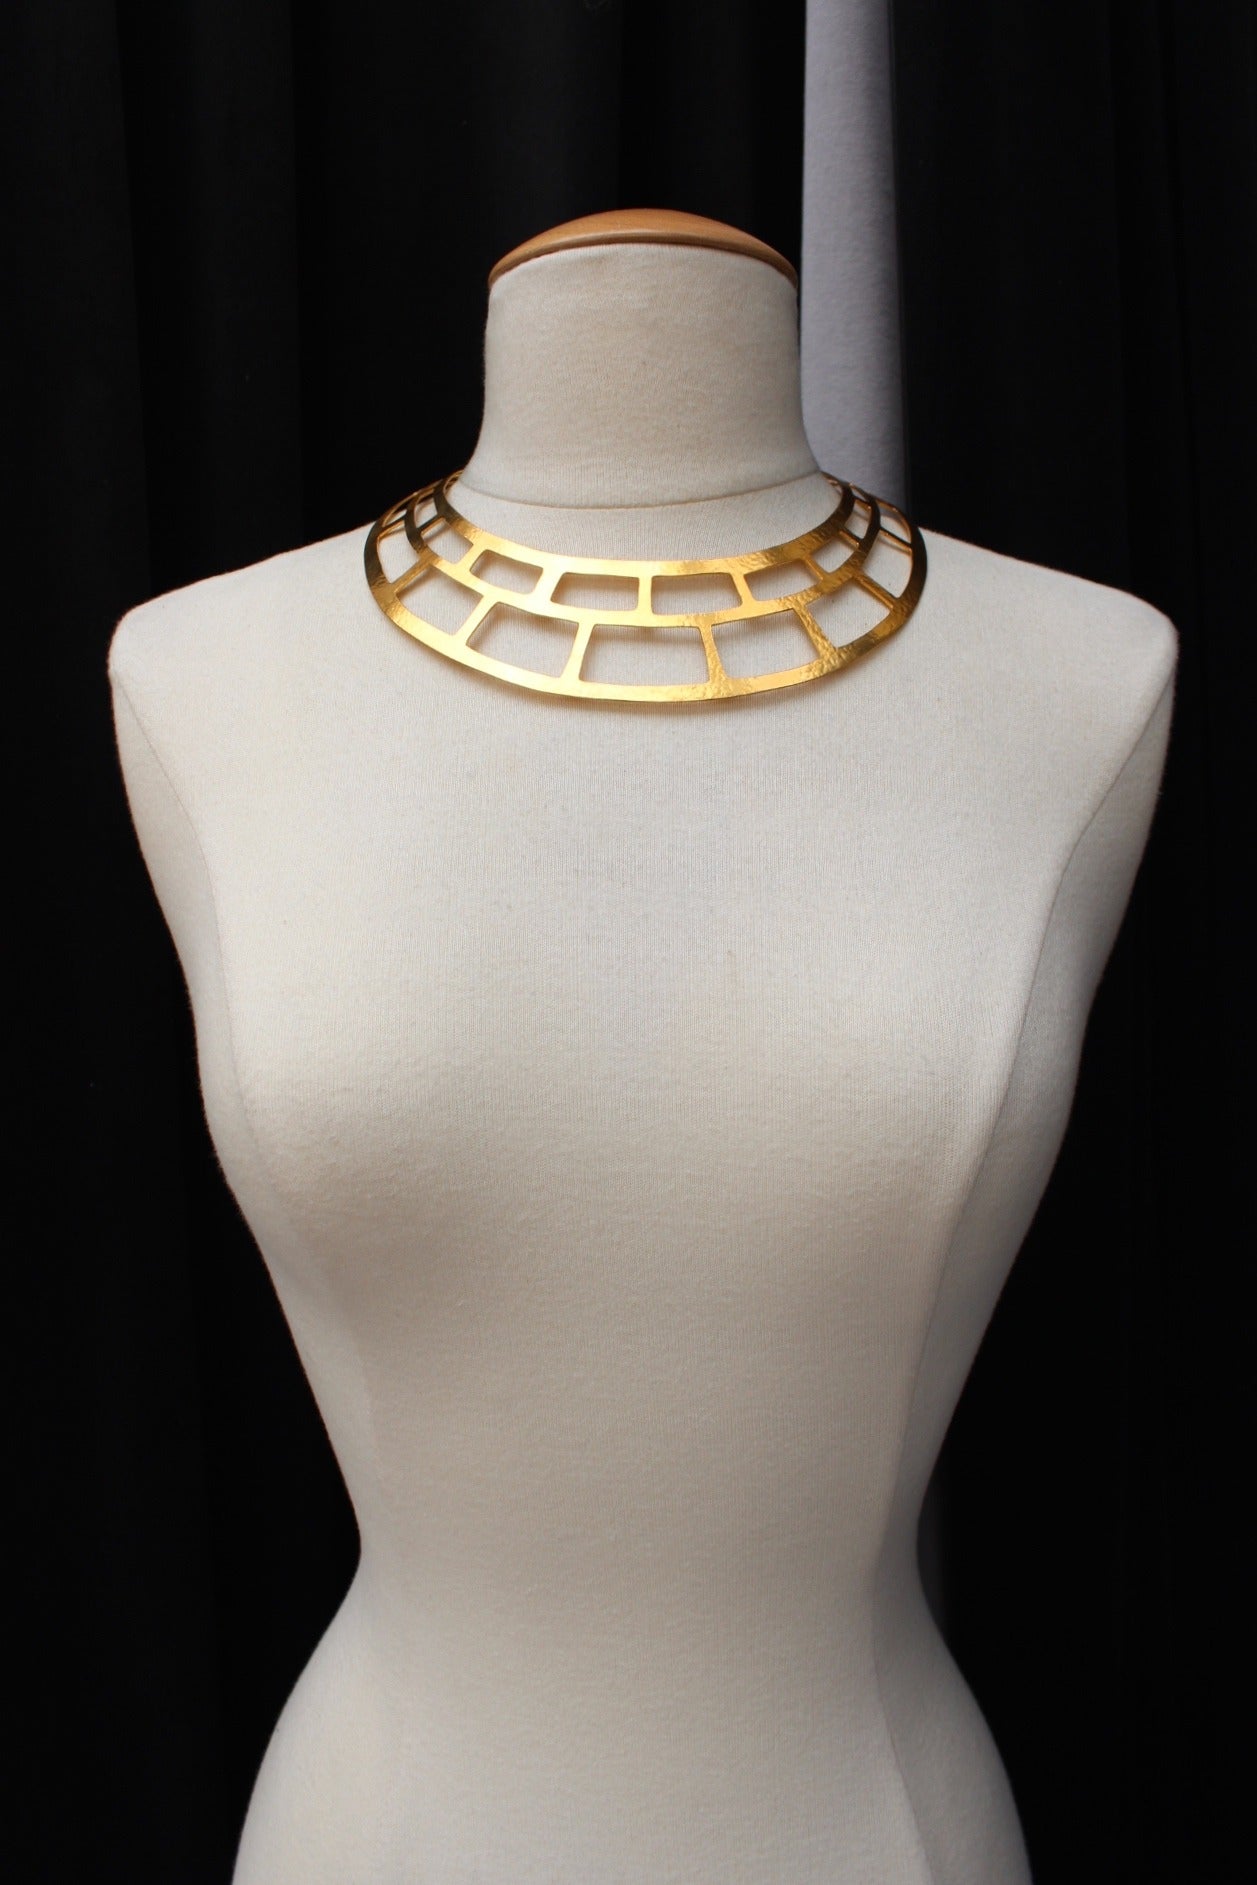 HERVE VAN DER STRAETEN (Made in France) Openwork and hammered gold brass torque necklace constructed with rectangular work. 
Open space in the back. 

Recent Collection. 

Excellent condition. 

Signed (see photo 6)

Dimensions: 
Neck